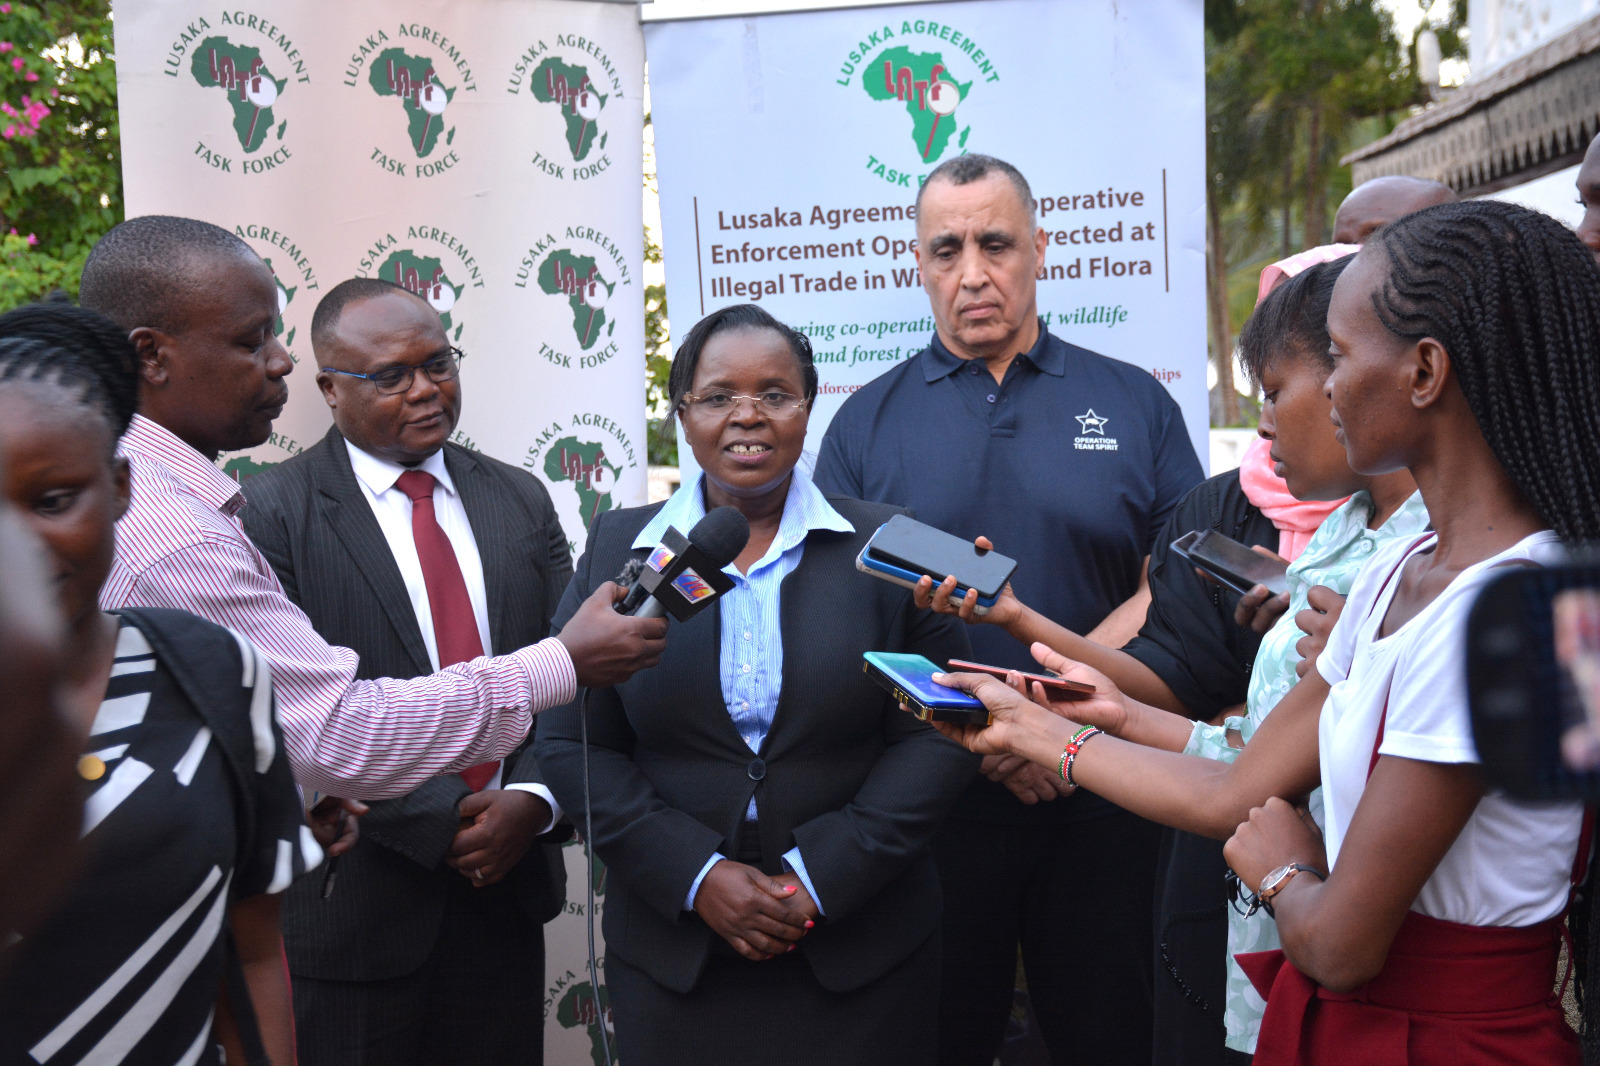 CS Malonza addressing the media during the Lusaka Agreement Cooperative Enforcement Operations Directed at Illegal Trade in Wild Fauna and Flora Workshop.